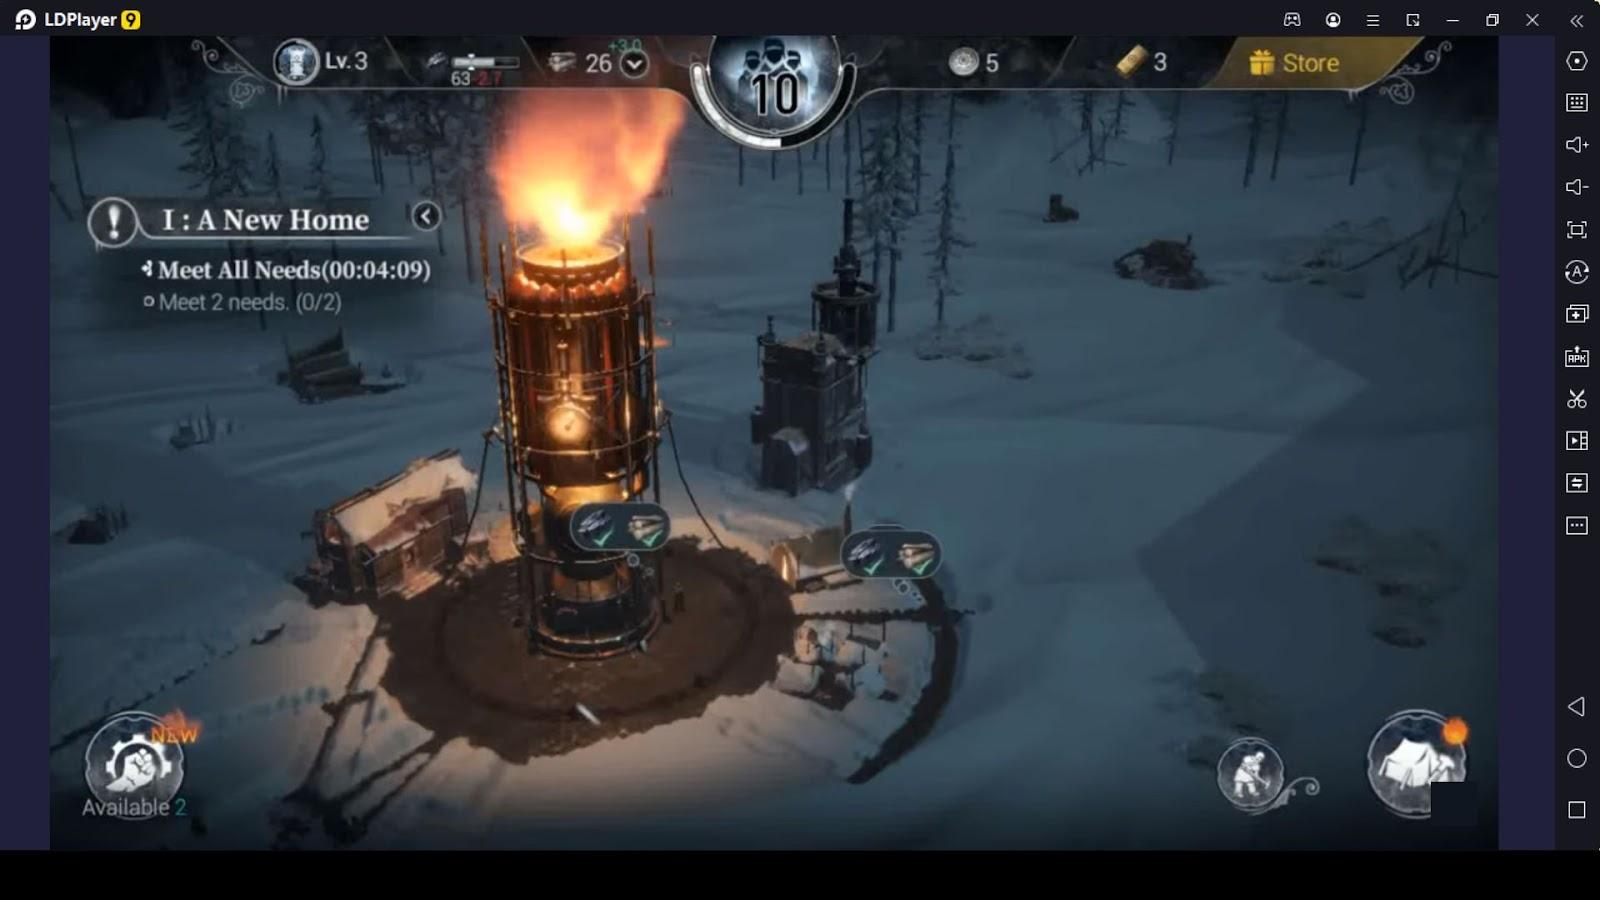 The Gameplay of FrostPunk: Beyond the Ice